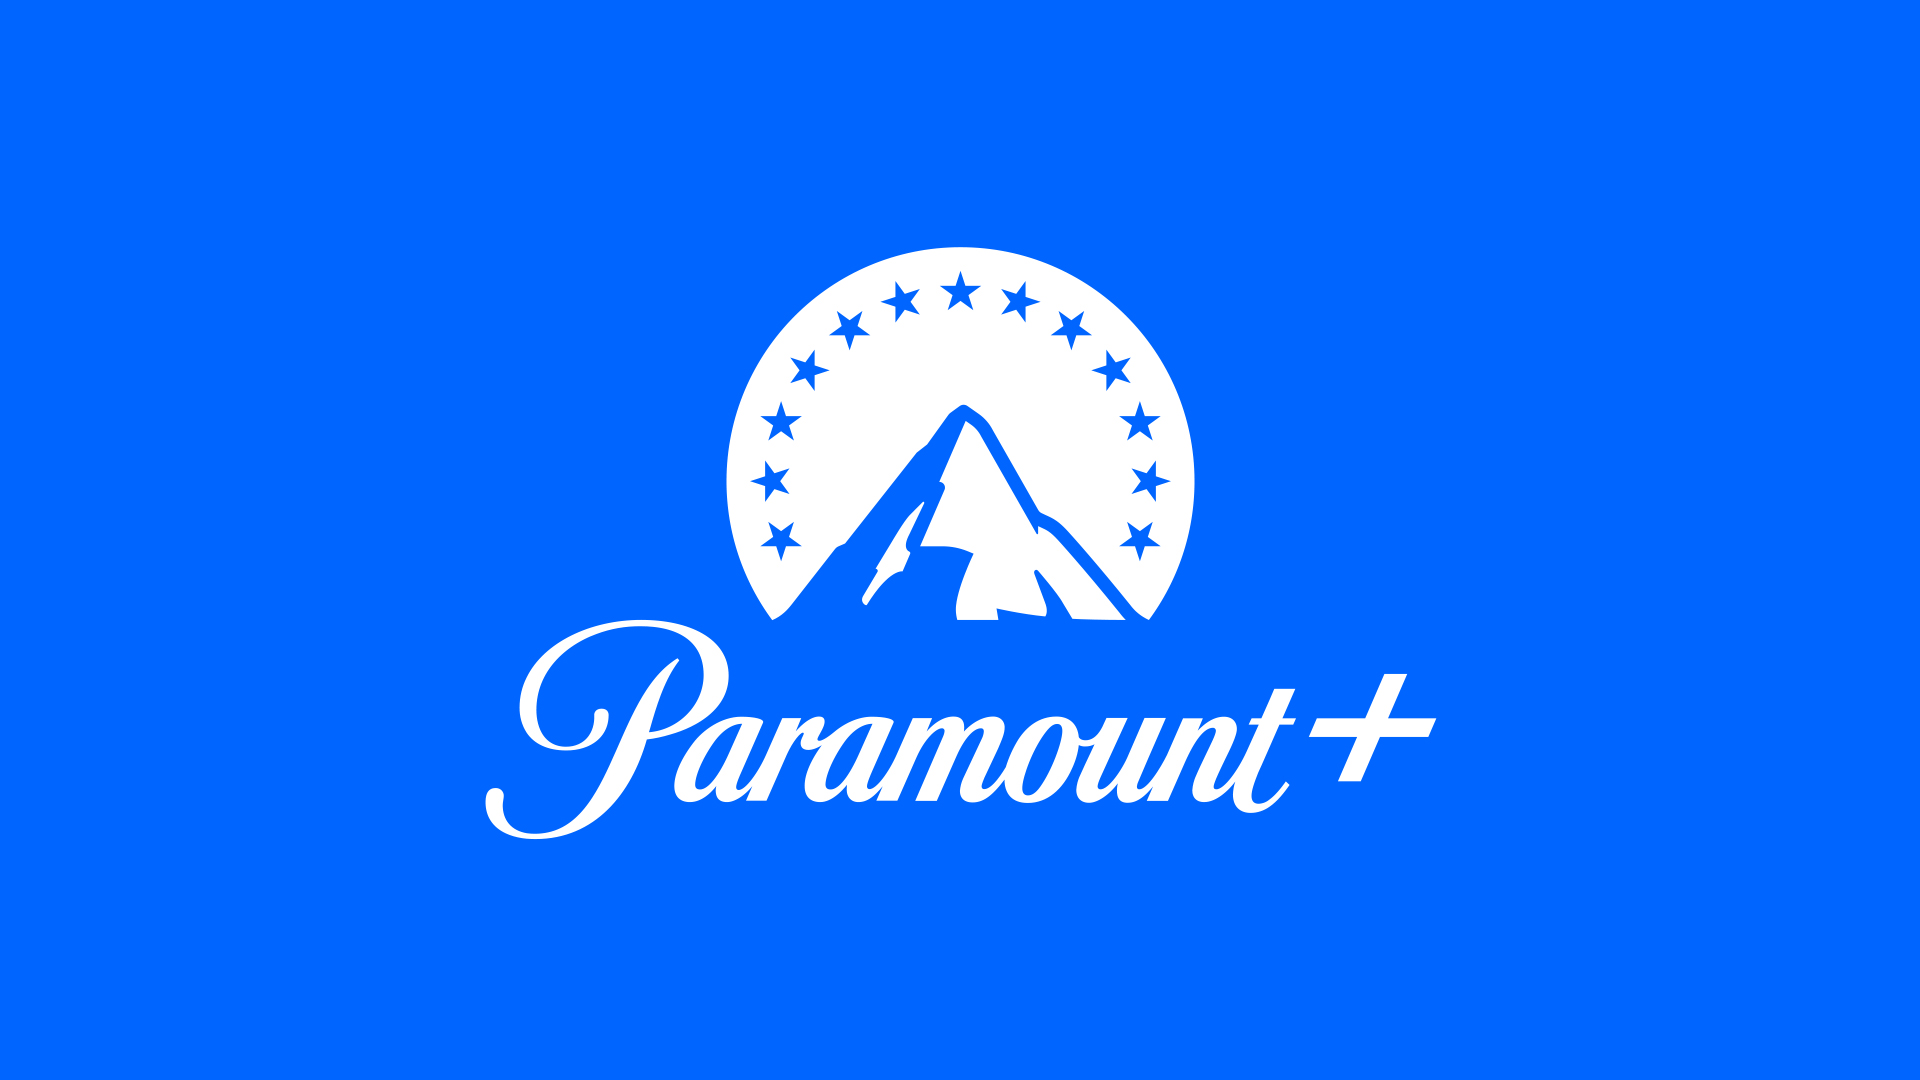 Paramount+ & Peacock Are Reportedly in Talks to Merge Into a Single Streaming Service